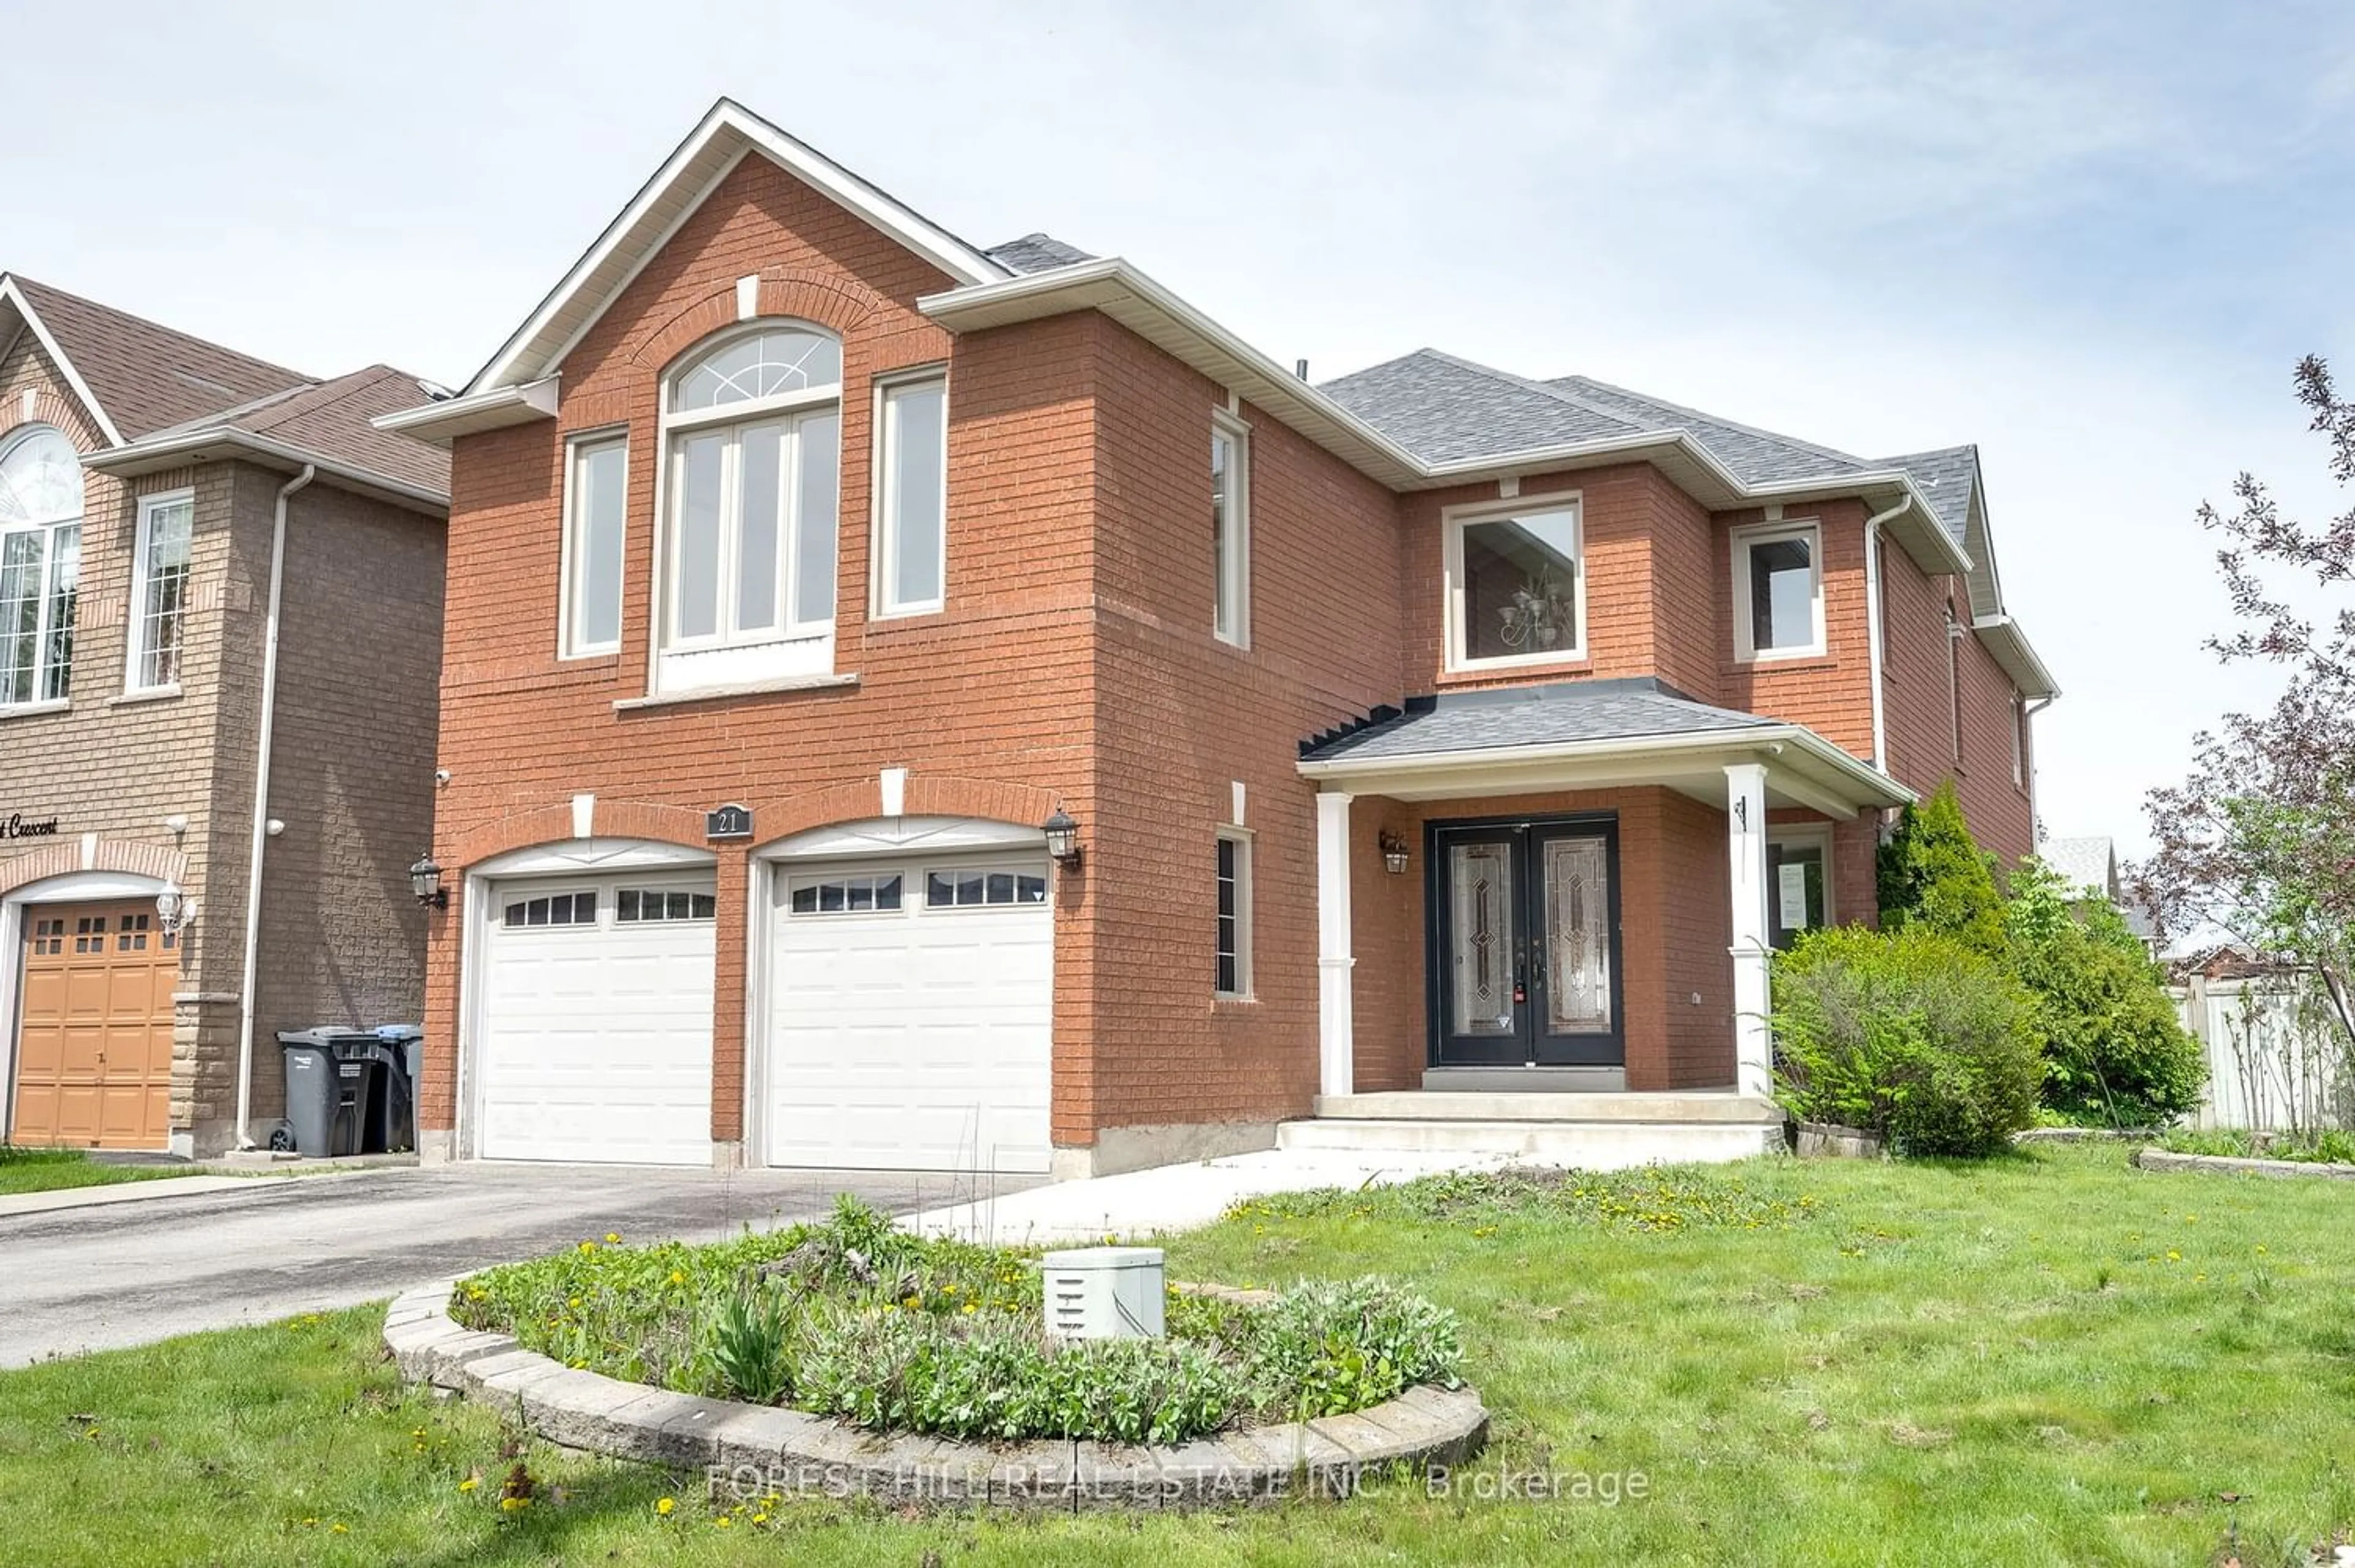 Home with brick exterior material for 21 Baccarat Cres, Brampton Ontario L7A 1K7